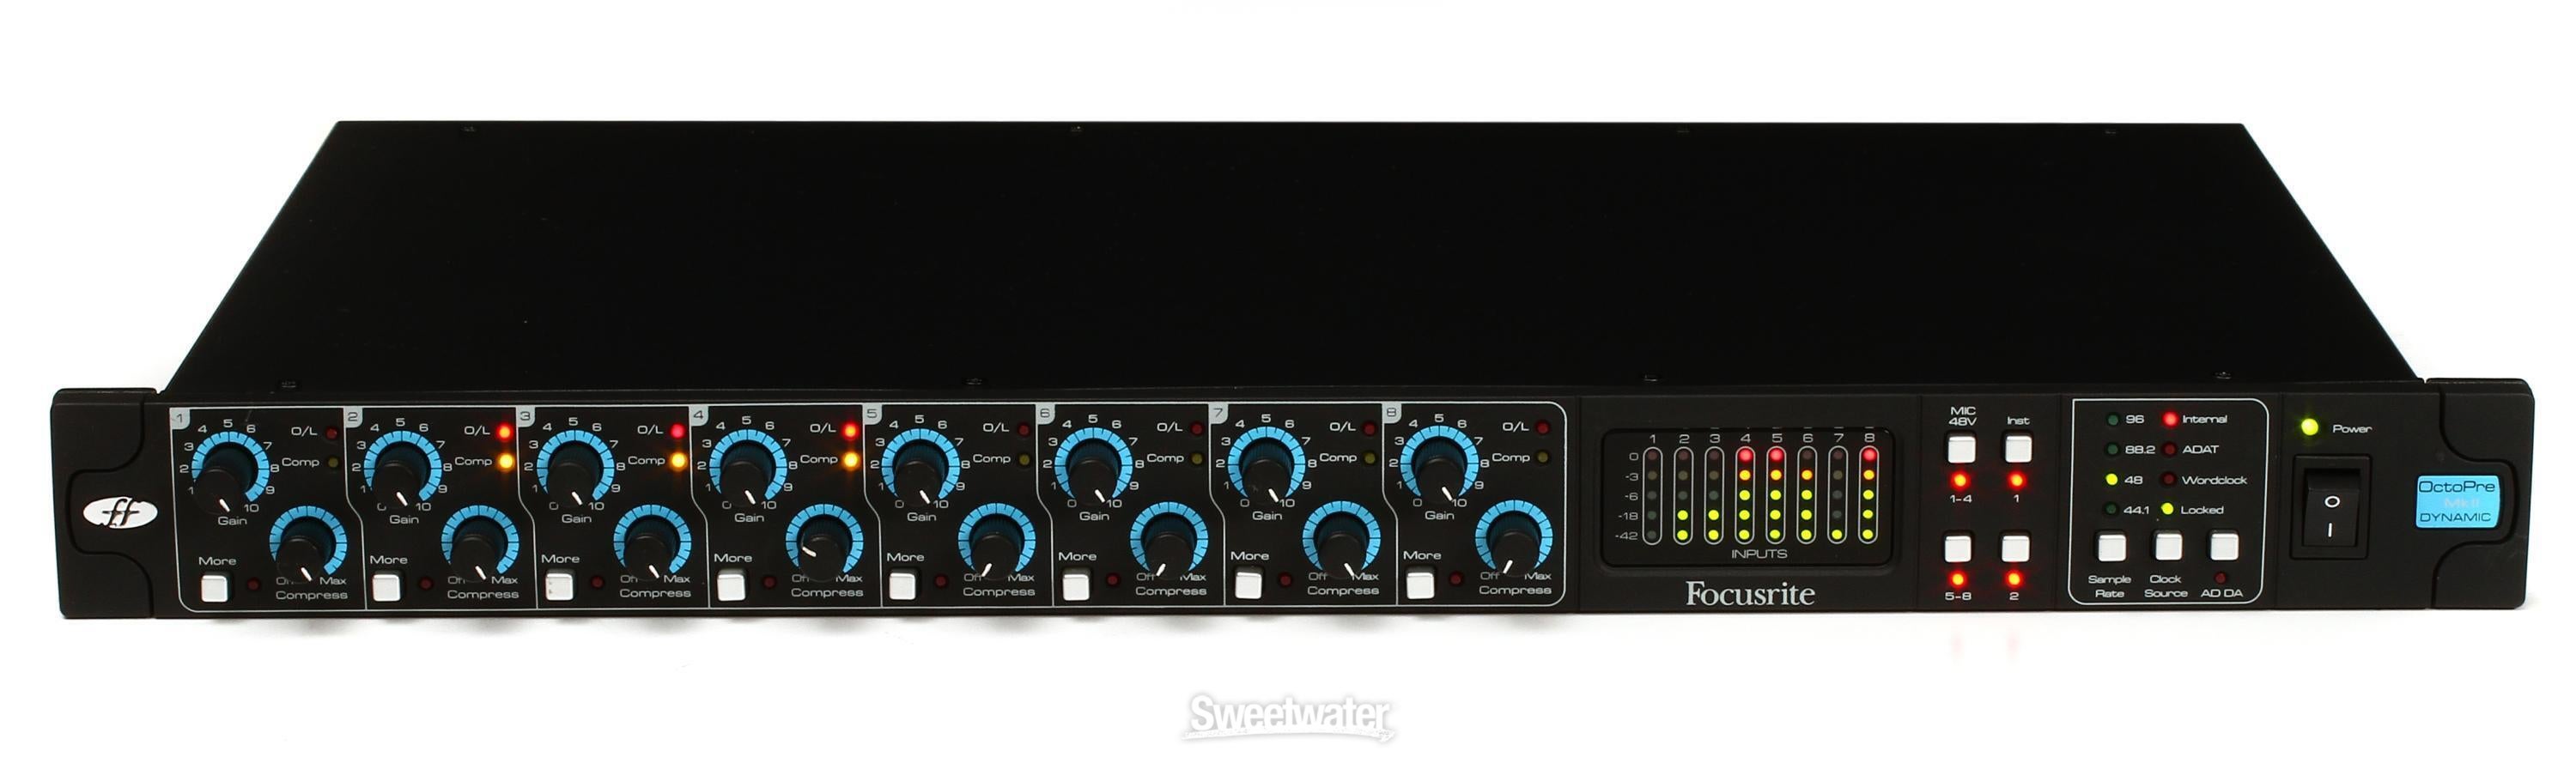 Focusrite OctoPre MkII Dynamic Reviews | Sweetwater